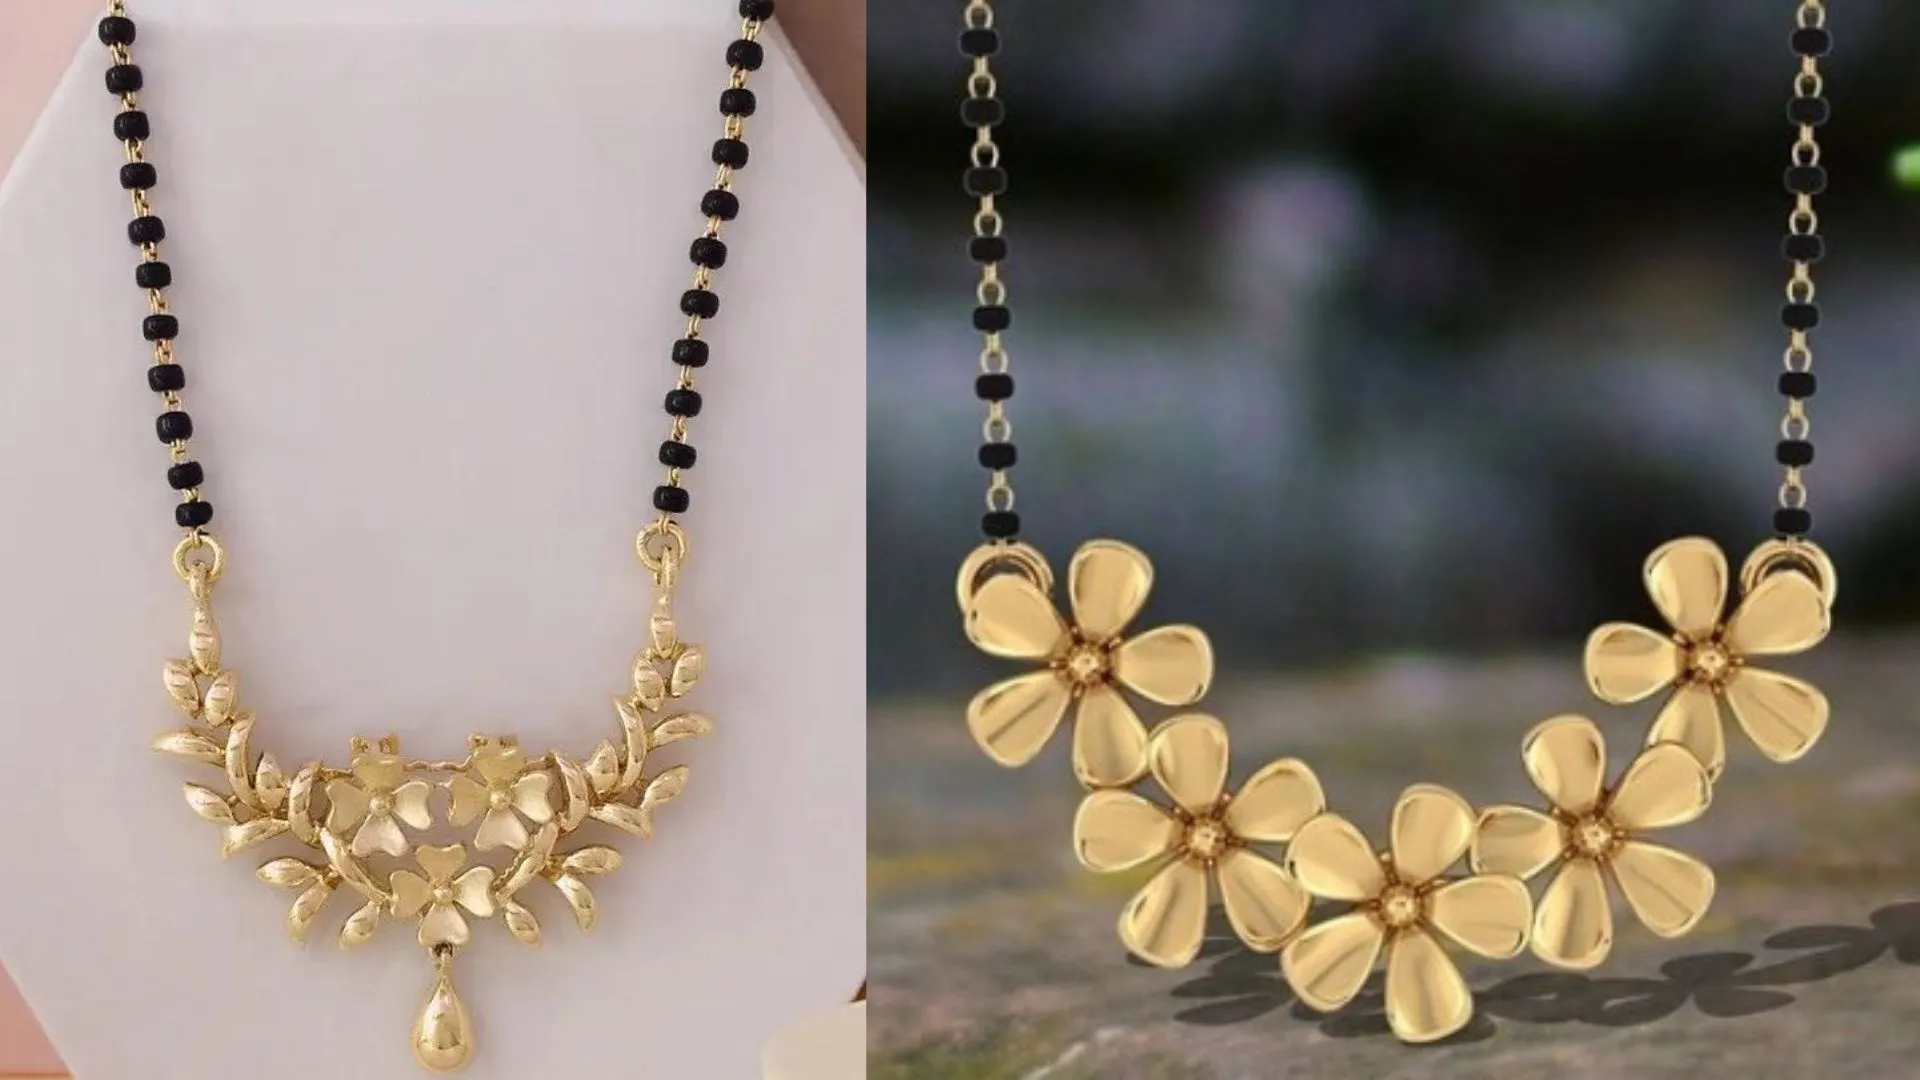 A floral mangalsutra with detailing or a daffodil-inspired pendant.